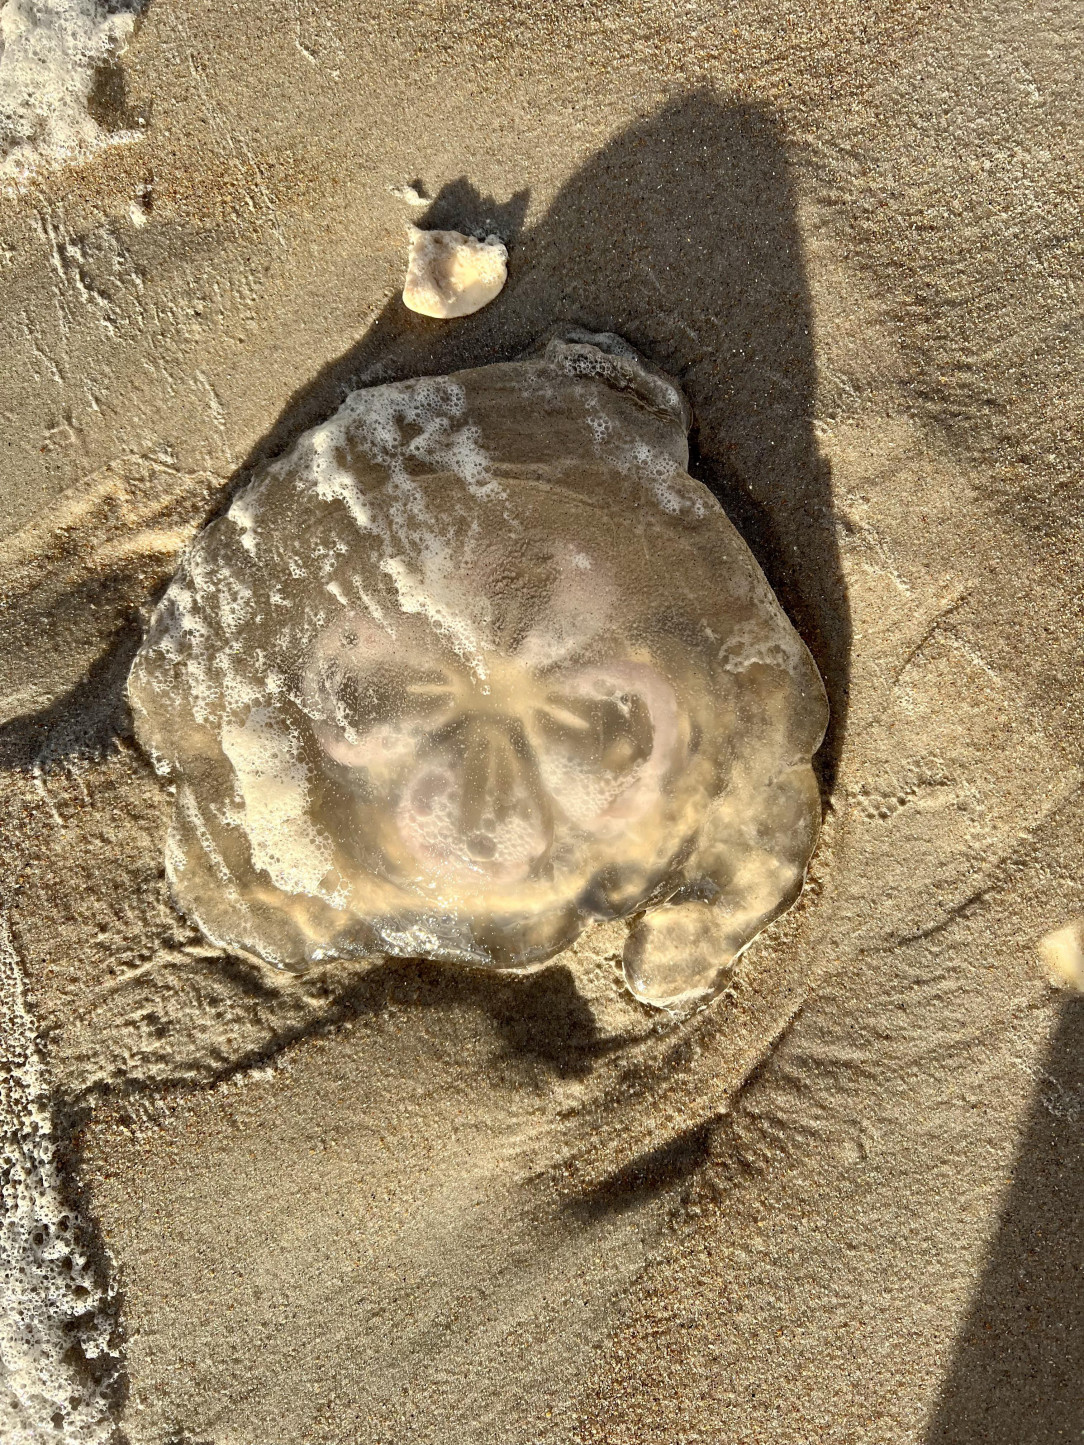 What kind of jellyfish is this?